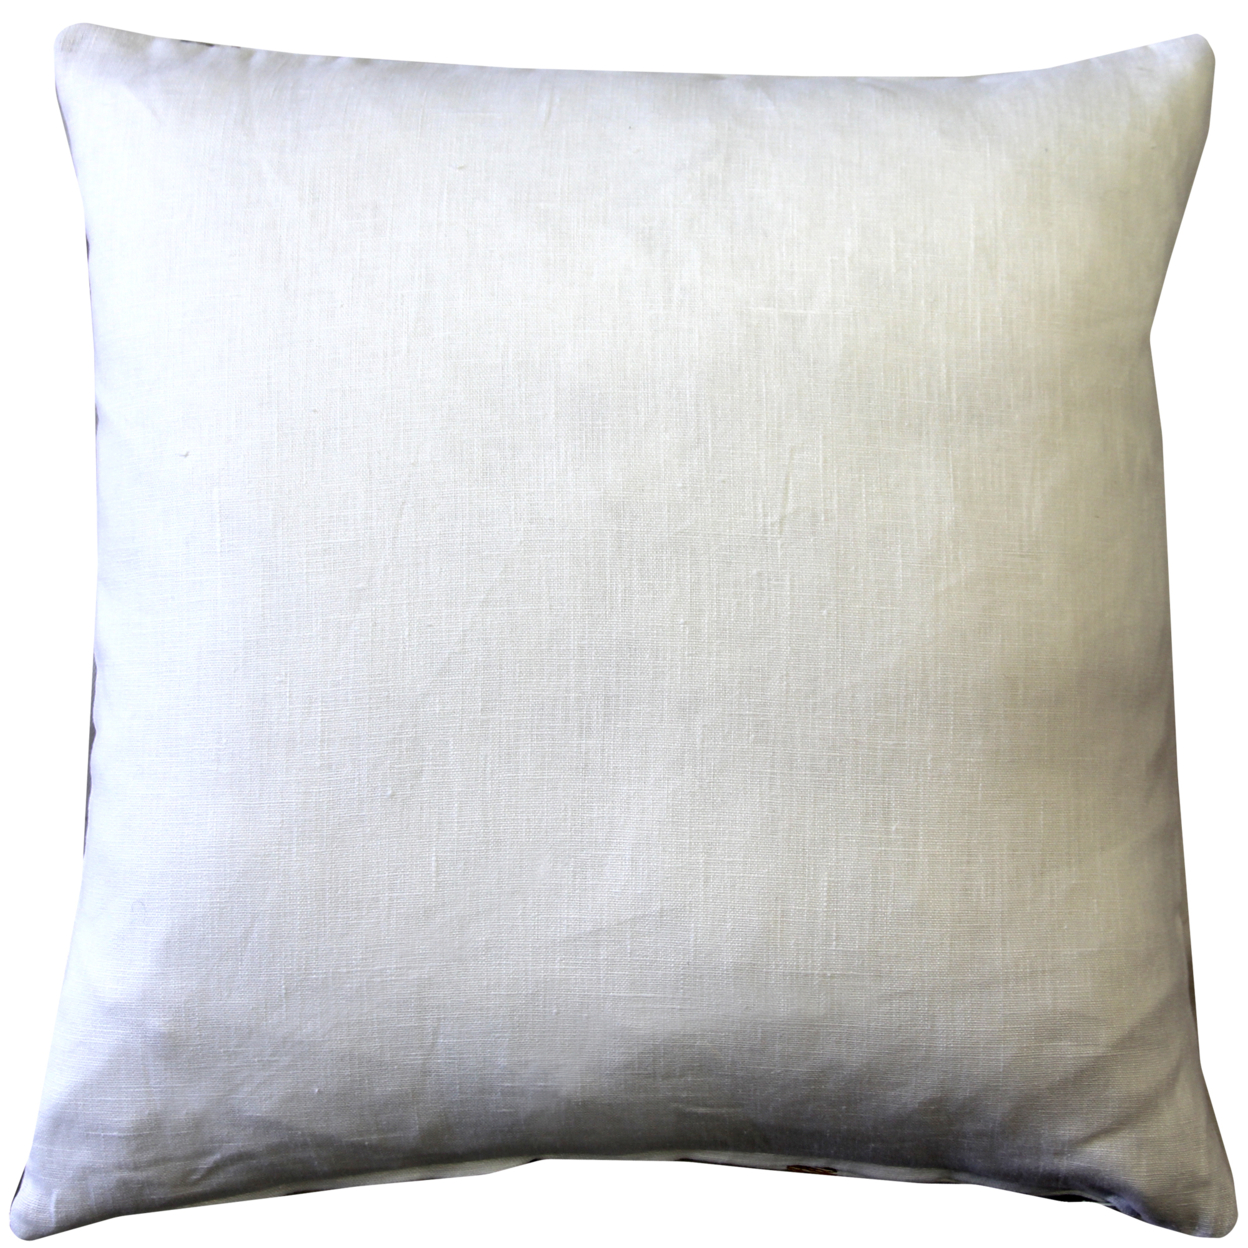 Wandering Lines Forest Grove Throw Pillow 19x19 Inches Square, Complete Pillow With Polyfill Pillow Insert